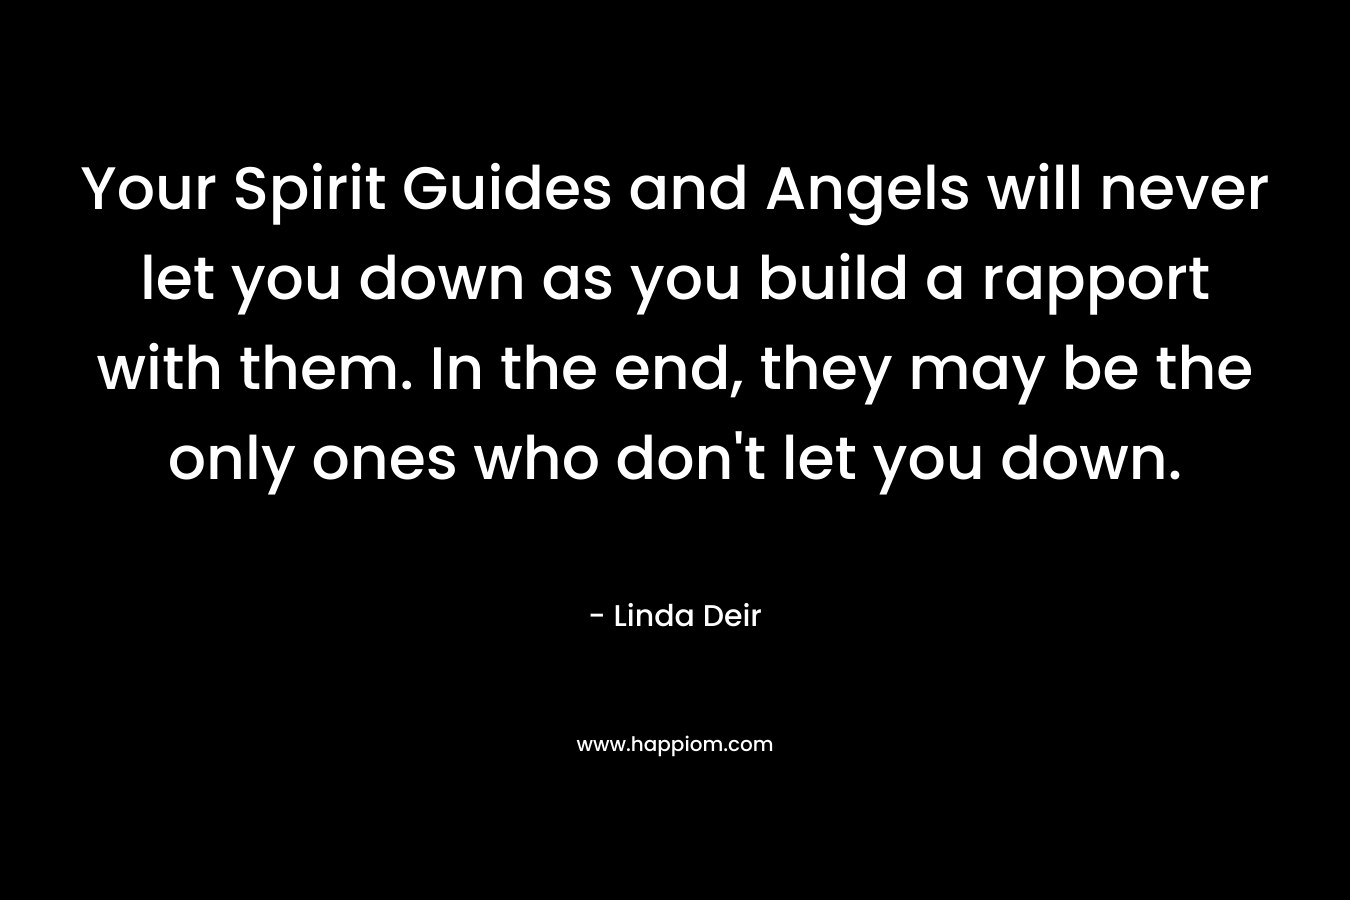 Your Spirit Guides and Angels will never let you down as you build a rapport with them. In the end, they may be the only ones who don’t let you down. – Linda Deir